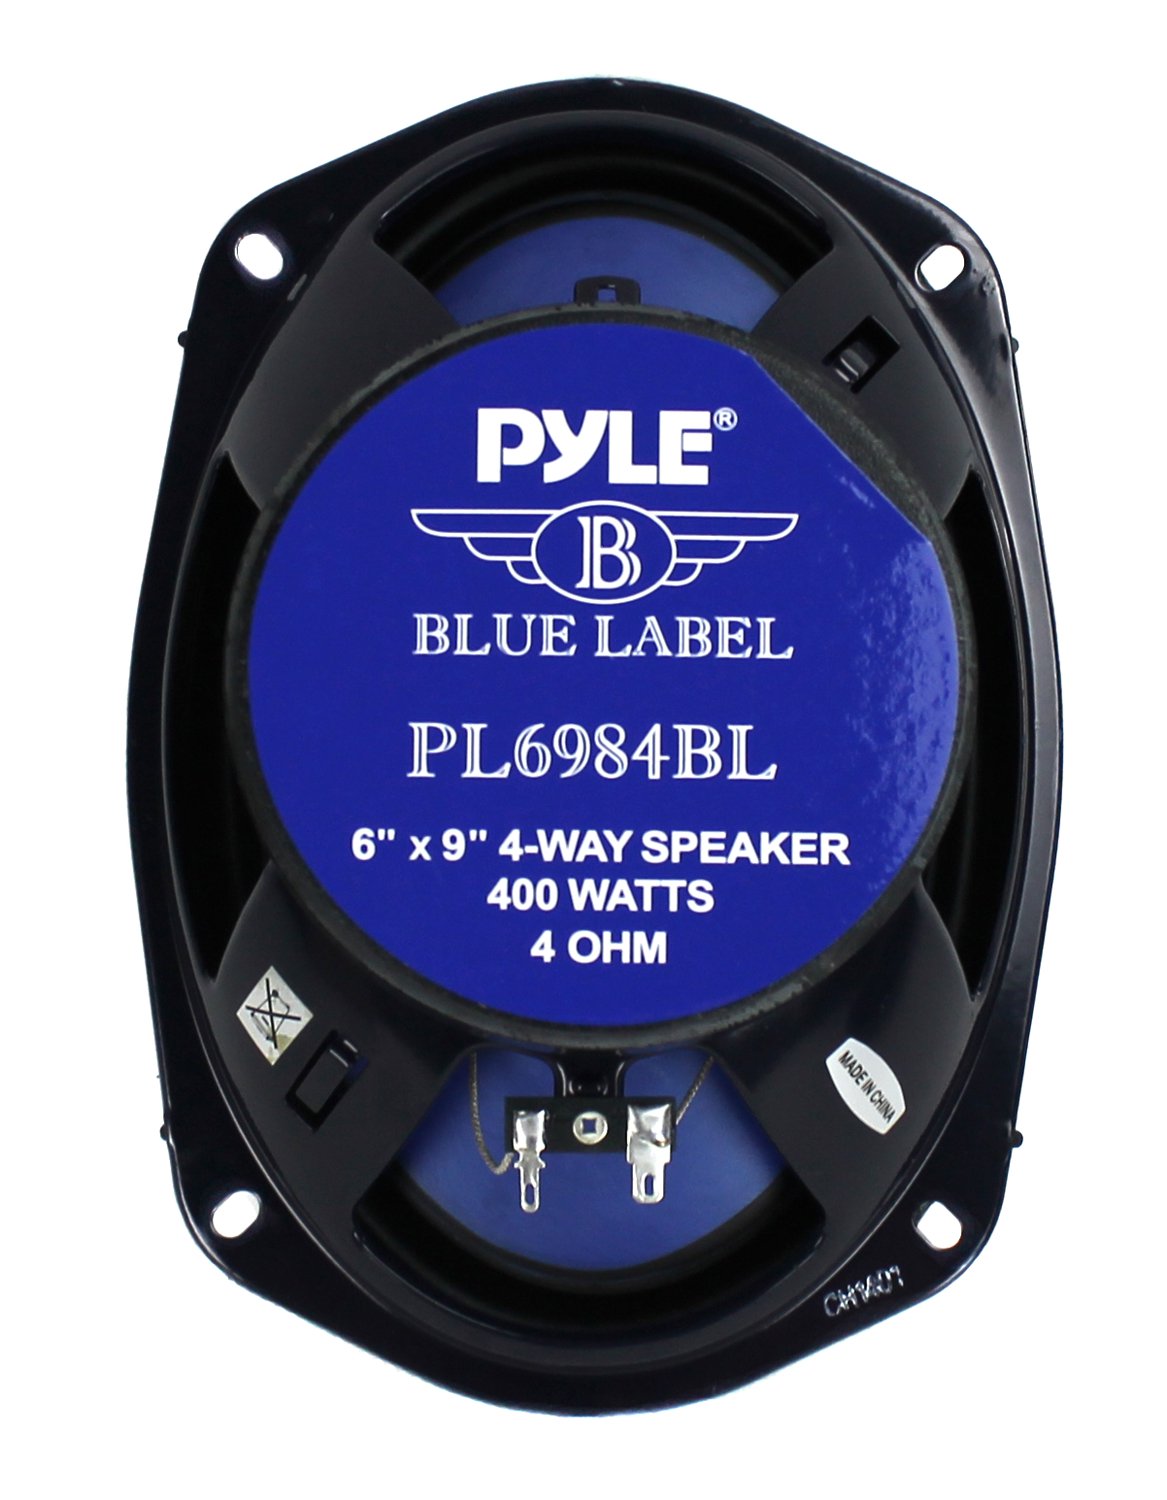 Pyle PL6984BL 6x9" 400 Watts 4-Way Car Coaxial Speakers Audio Stereo Blue - image 5 of 7